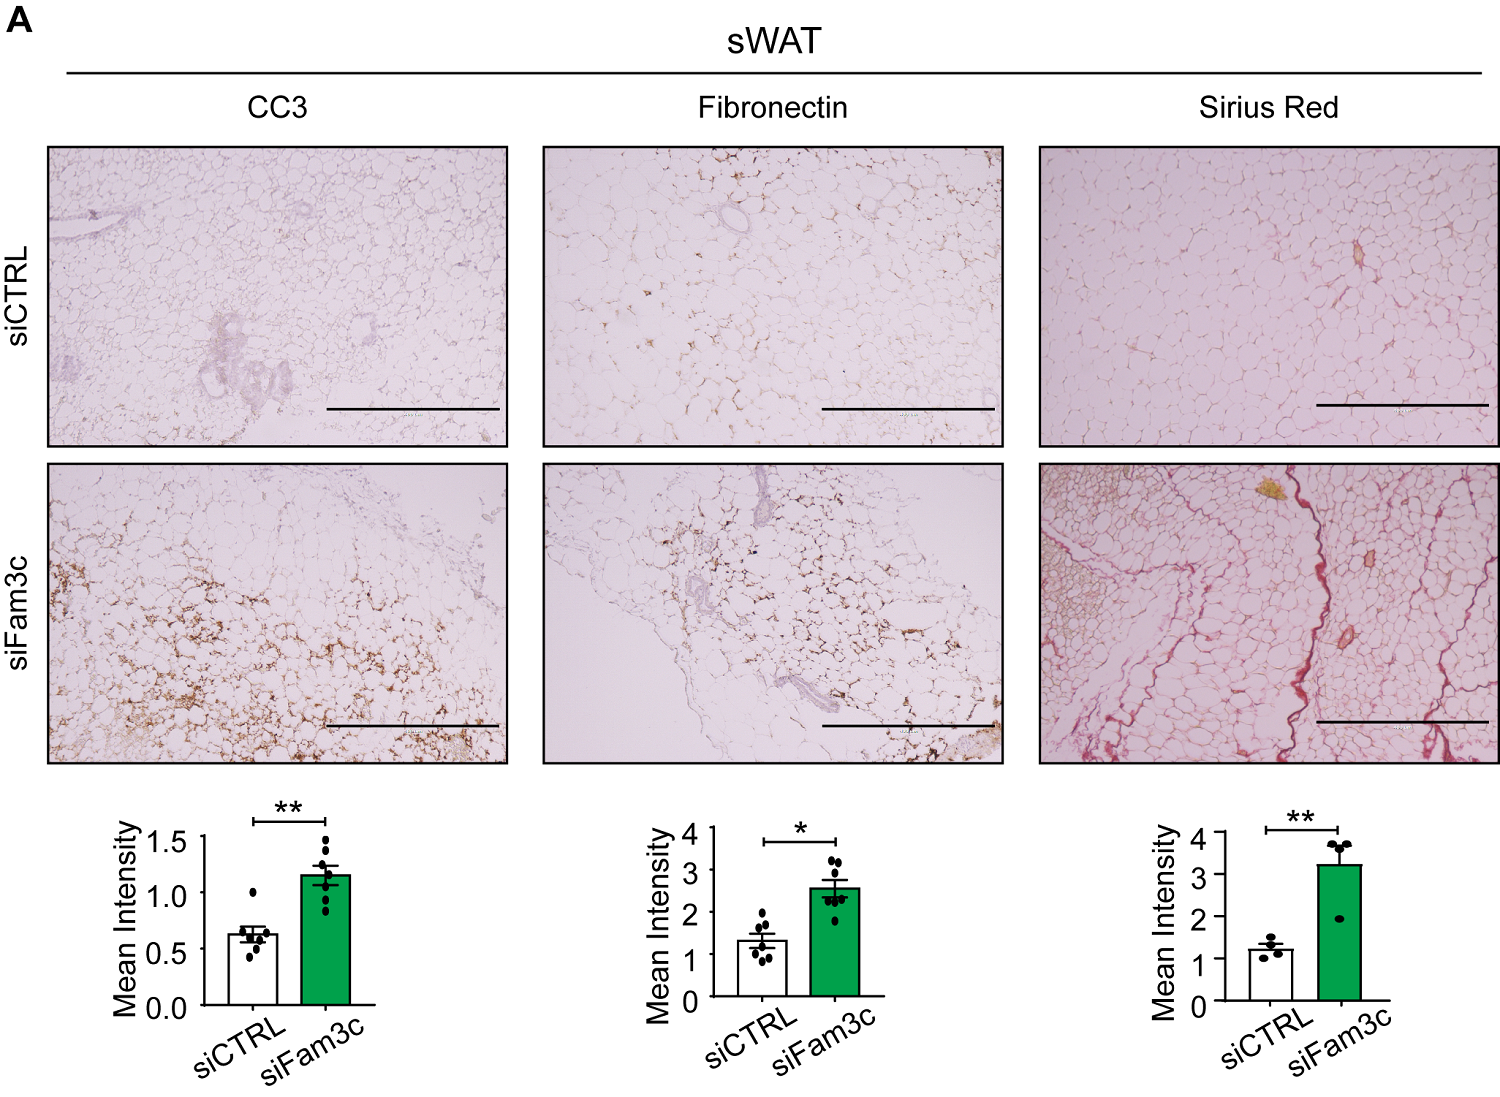 Figure 1. Fam3c knockdown in sWAT of MMTV-PyMT mice increases cell death and fibrosis of CAAs, ultimately inhibiting the growth and metastasis of primary tumors.